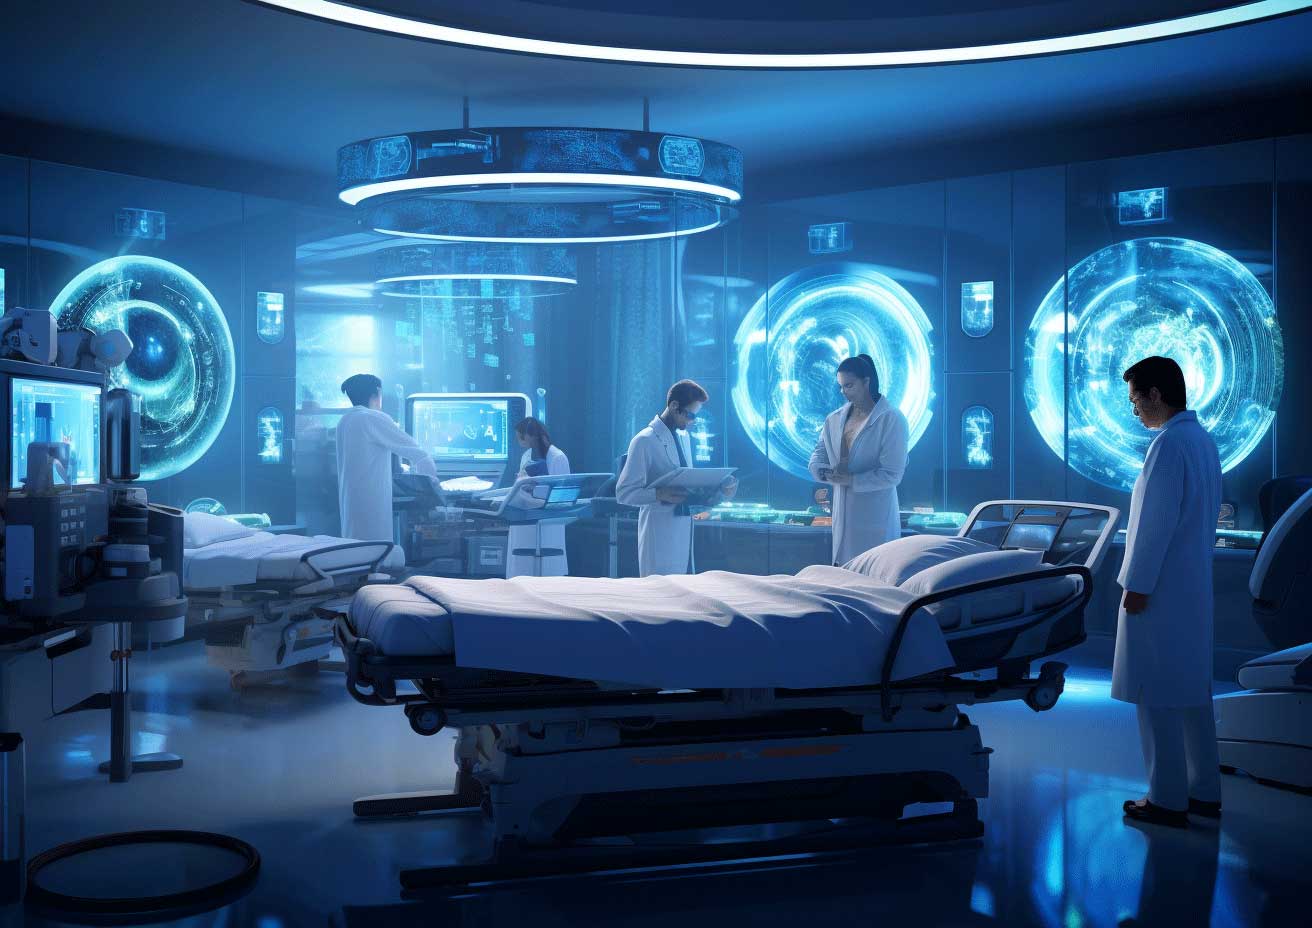 A futuristic medical room with a bed and monitors.